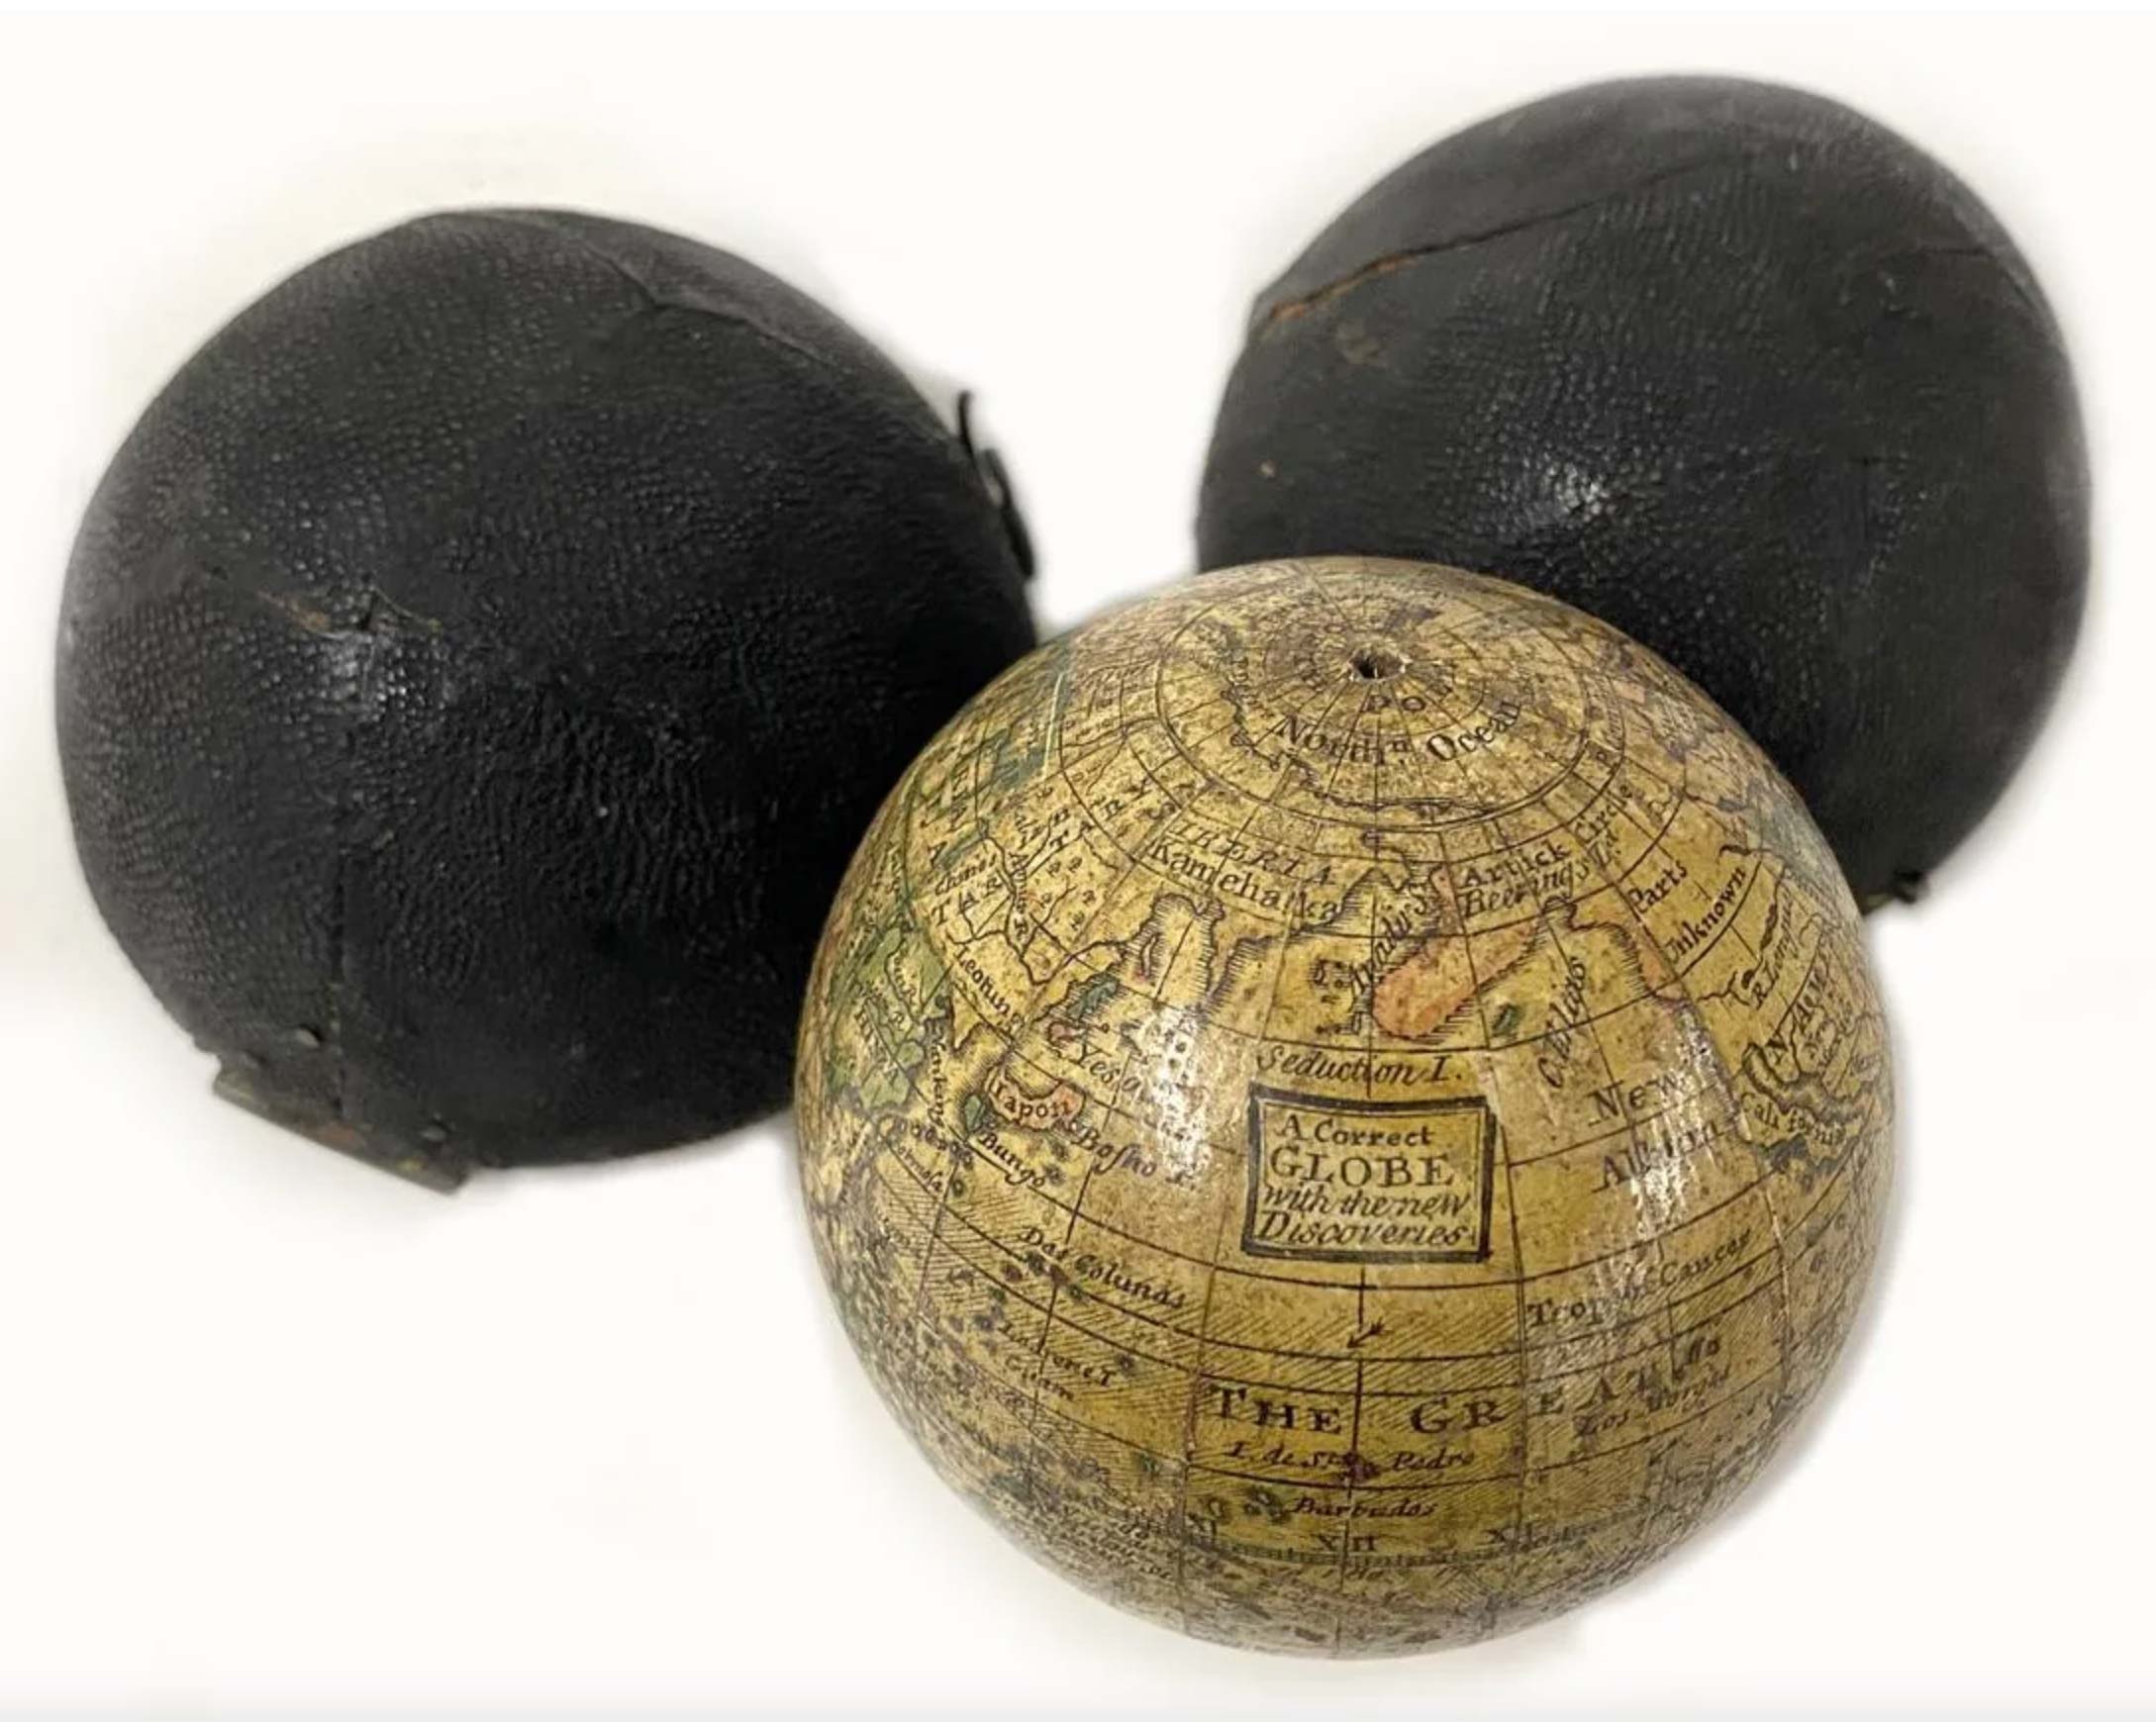 Miniature terrestrial pocket globe and case, England, 18th century, sold for $5,500. Image courtesy CRN Auctions